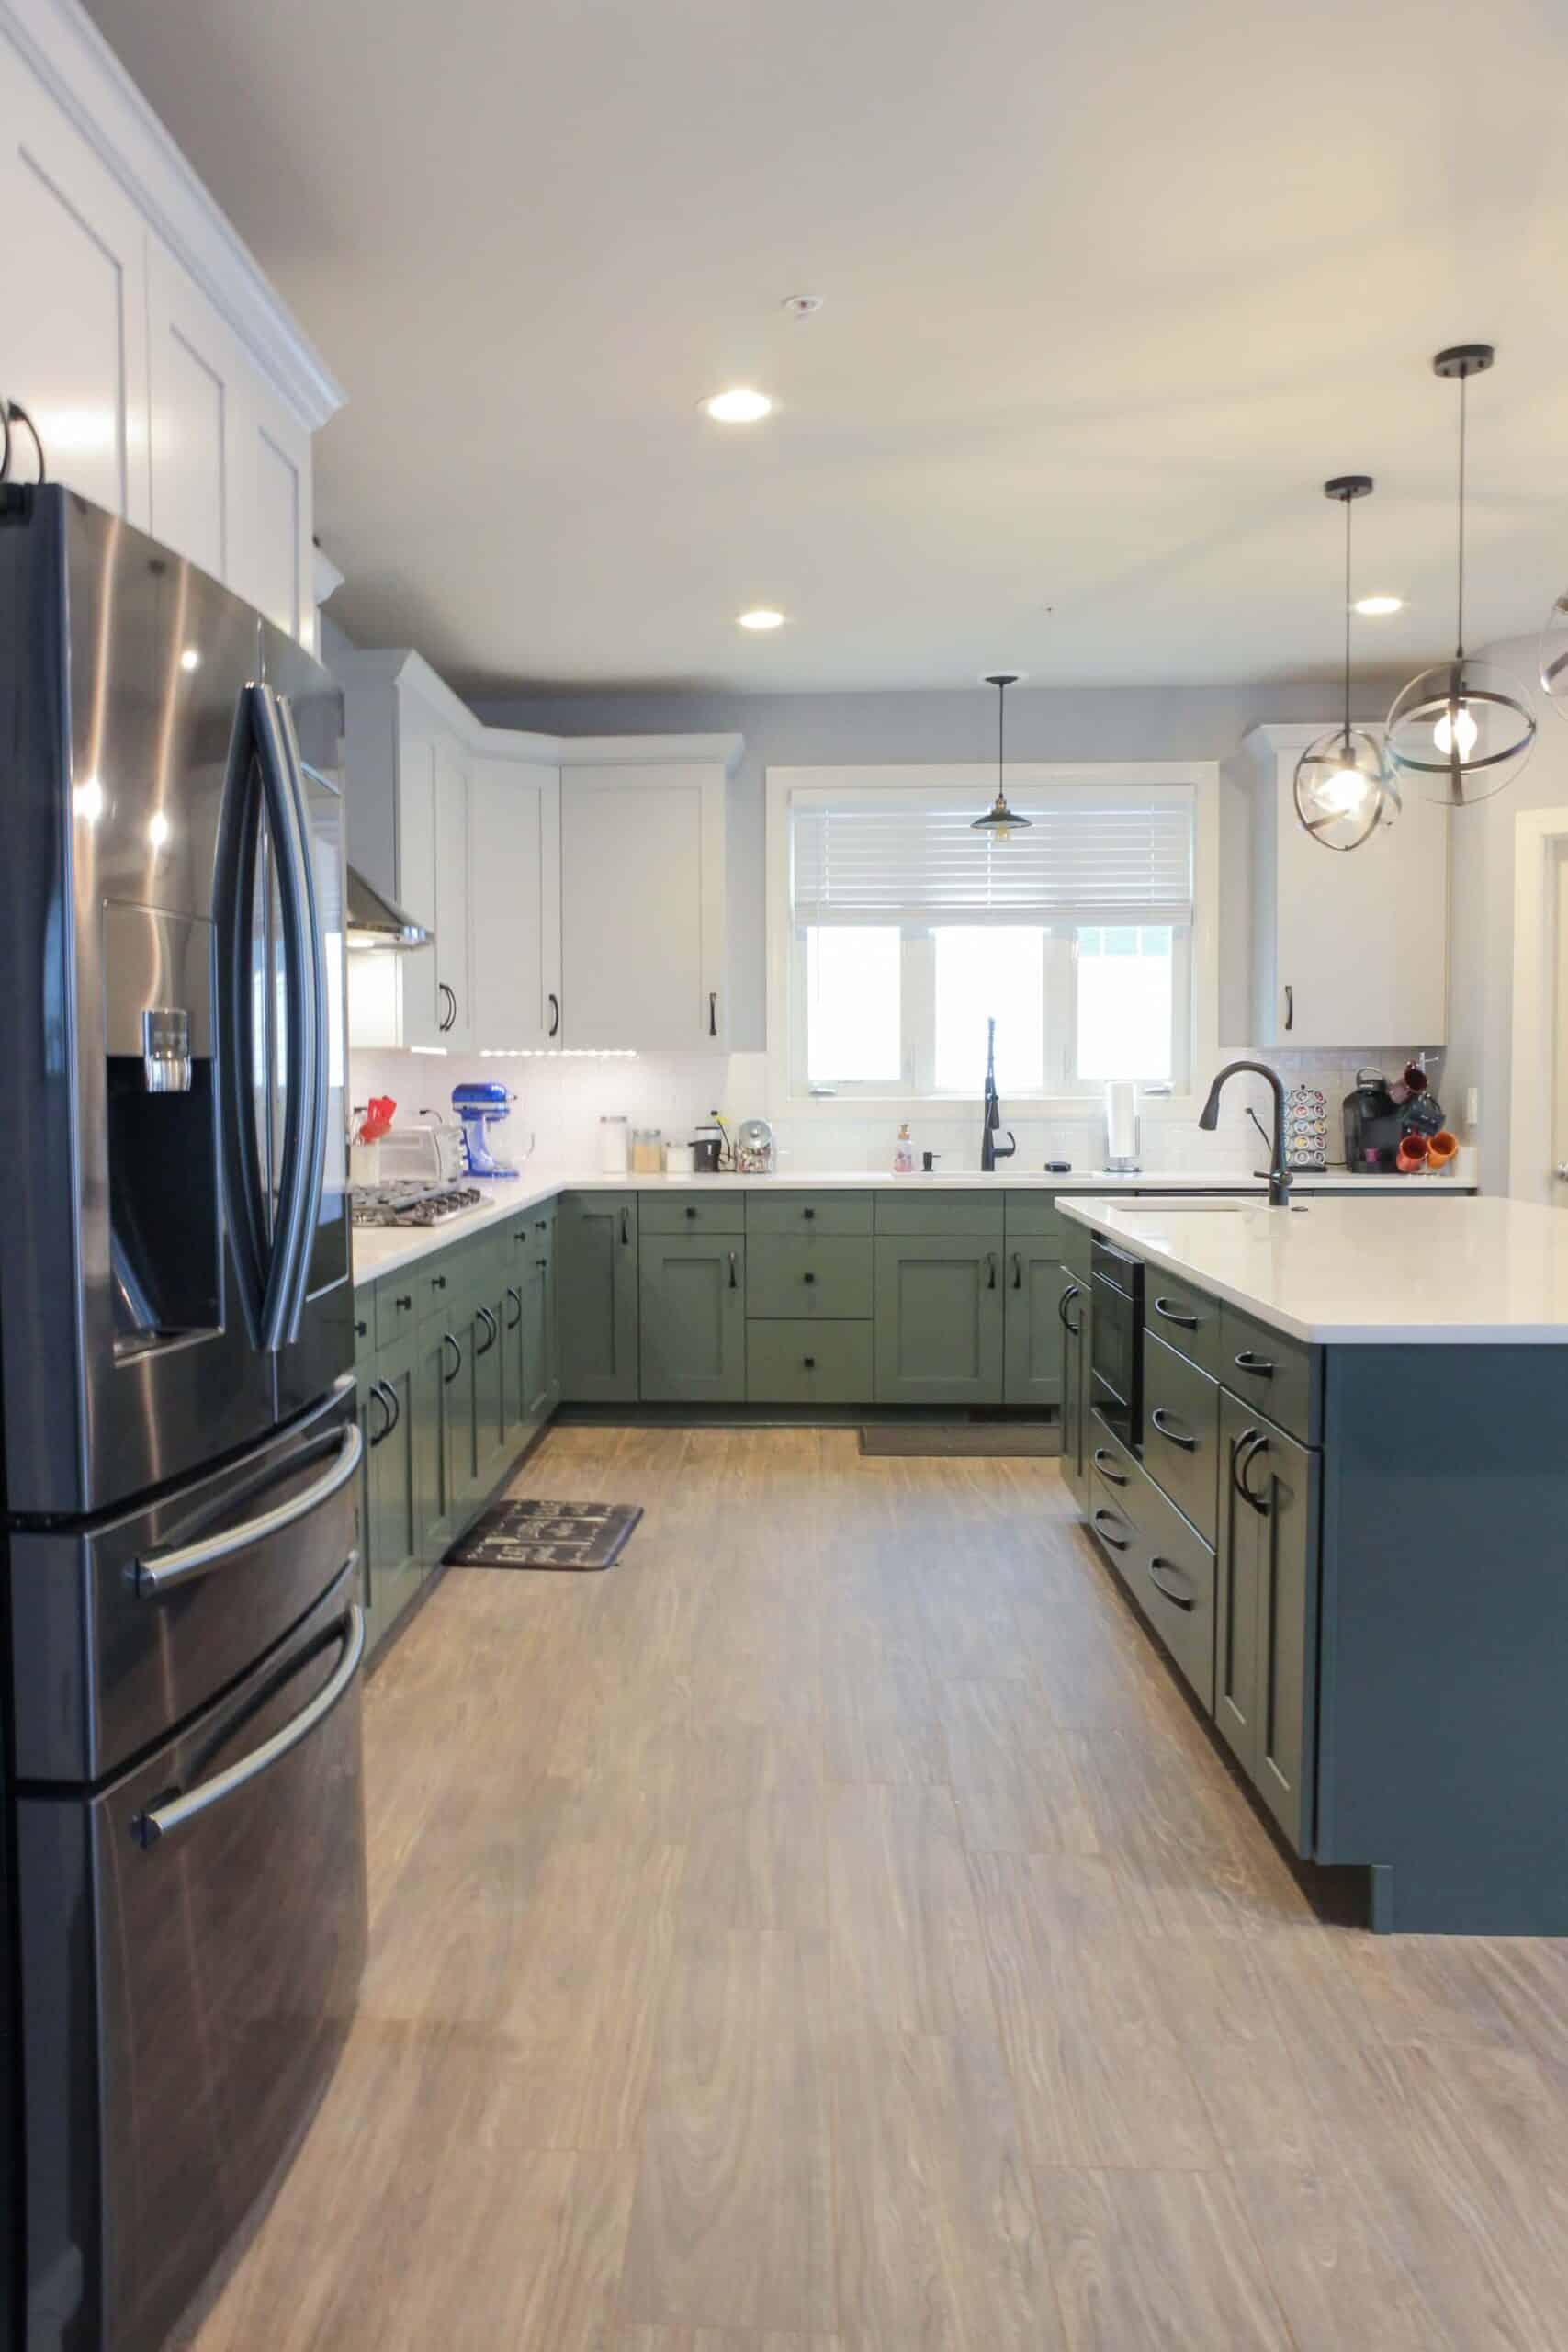 White and Green kitchen style with shaker cabinets